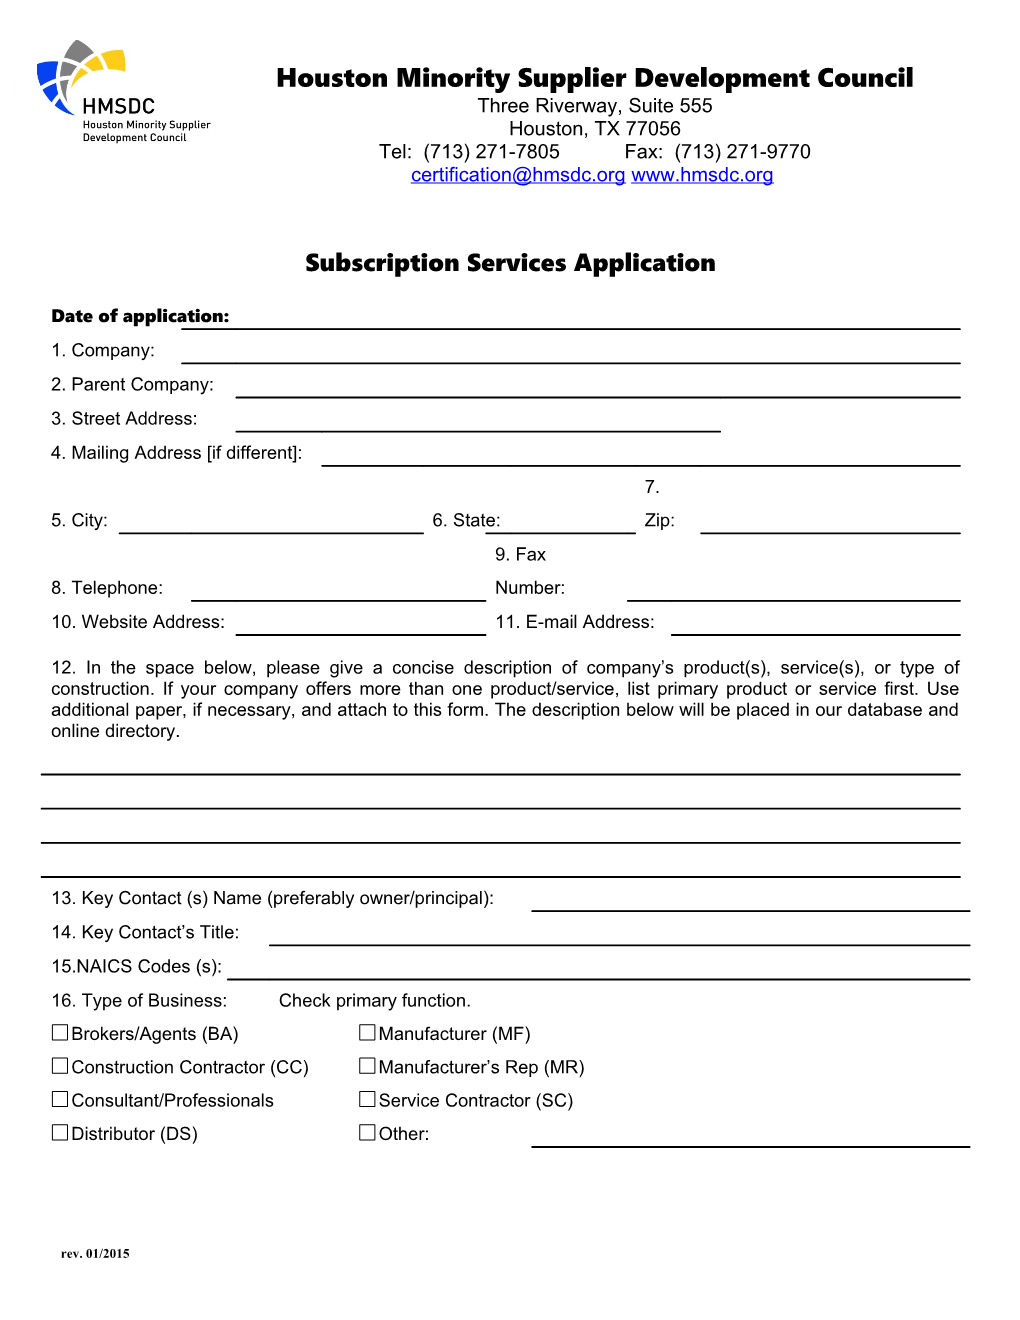 MBE Subscription Services Application Page1